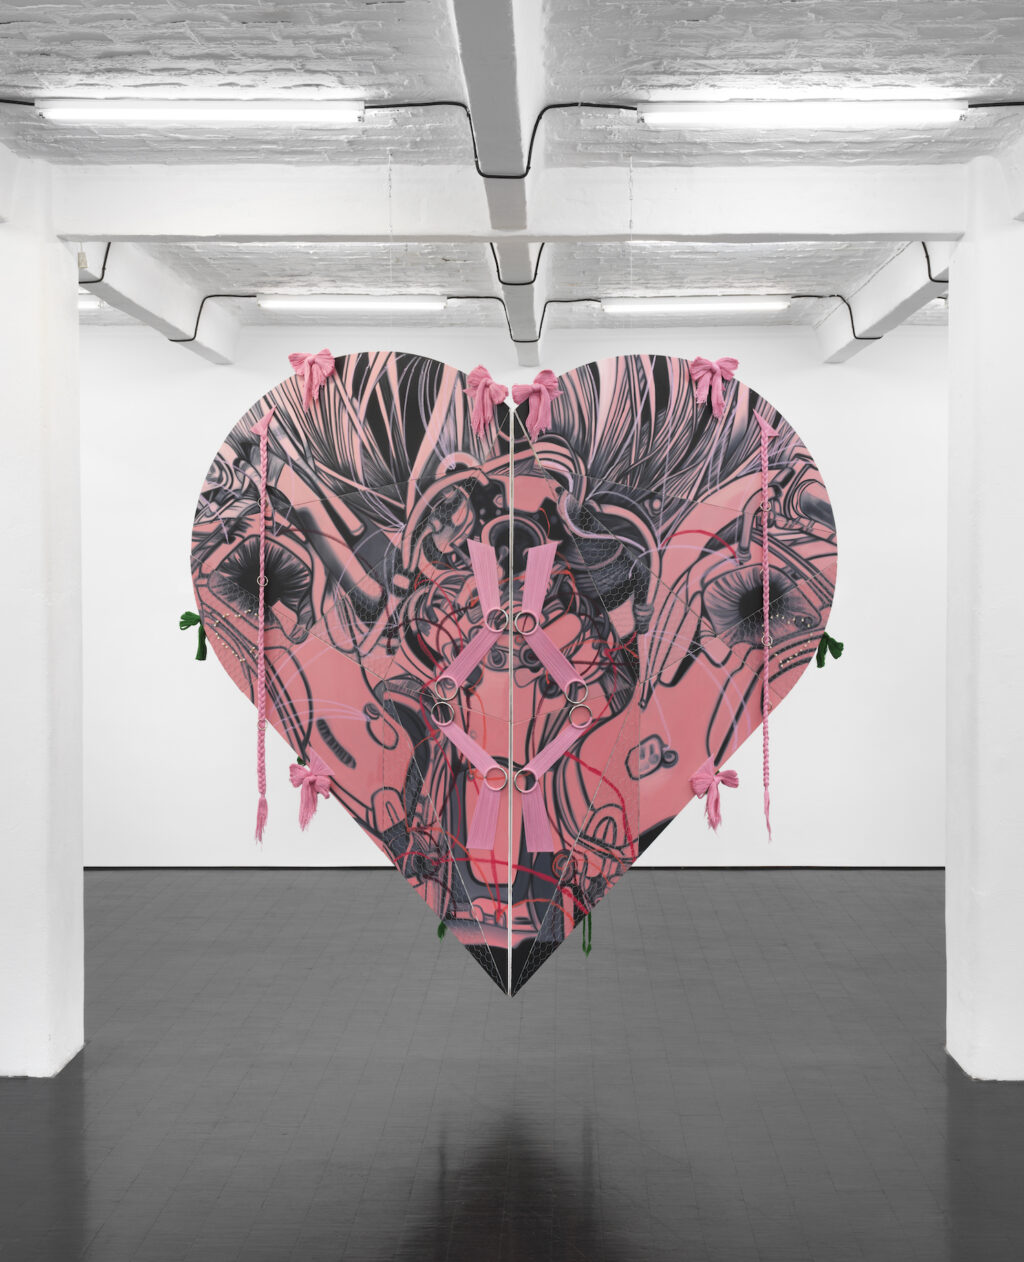 <p>GALERIE BARBARA WEISS</p>
<p> </p>
<p>Frieda Toranzo Jaeger, Open your heart because everything will change, 2023. Courtesy the artist and Galerie Barbara Weiss, Berlin. Photo Credit: Jens Ziehe</p>
